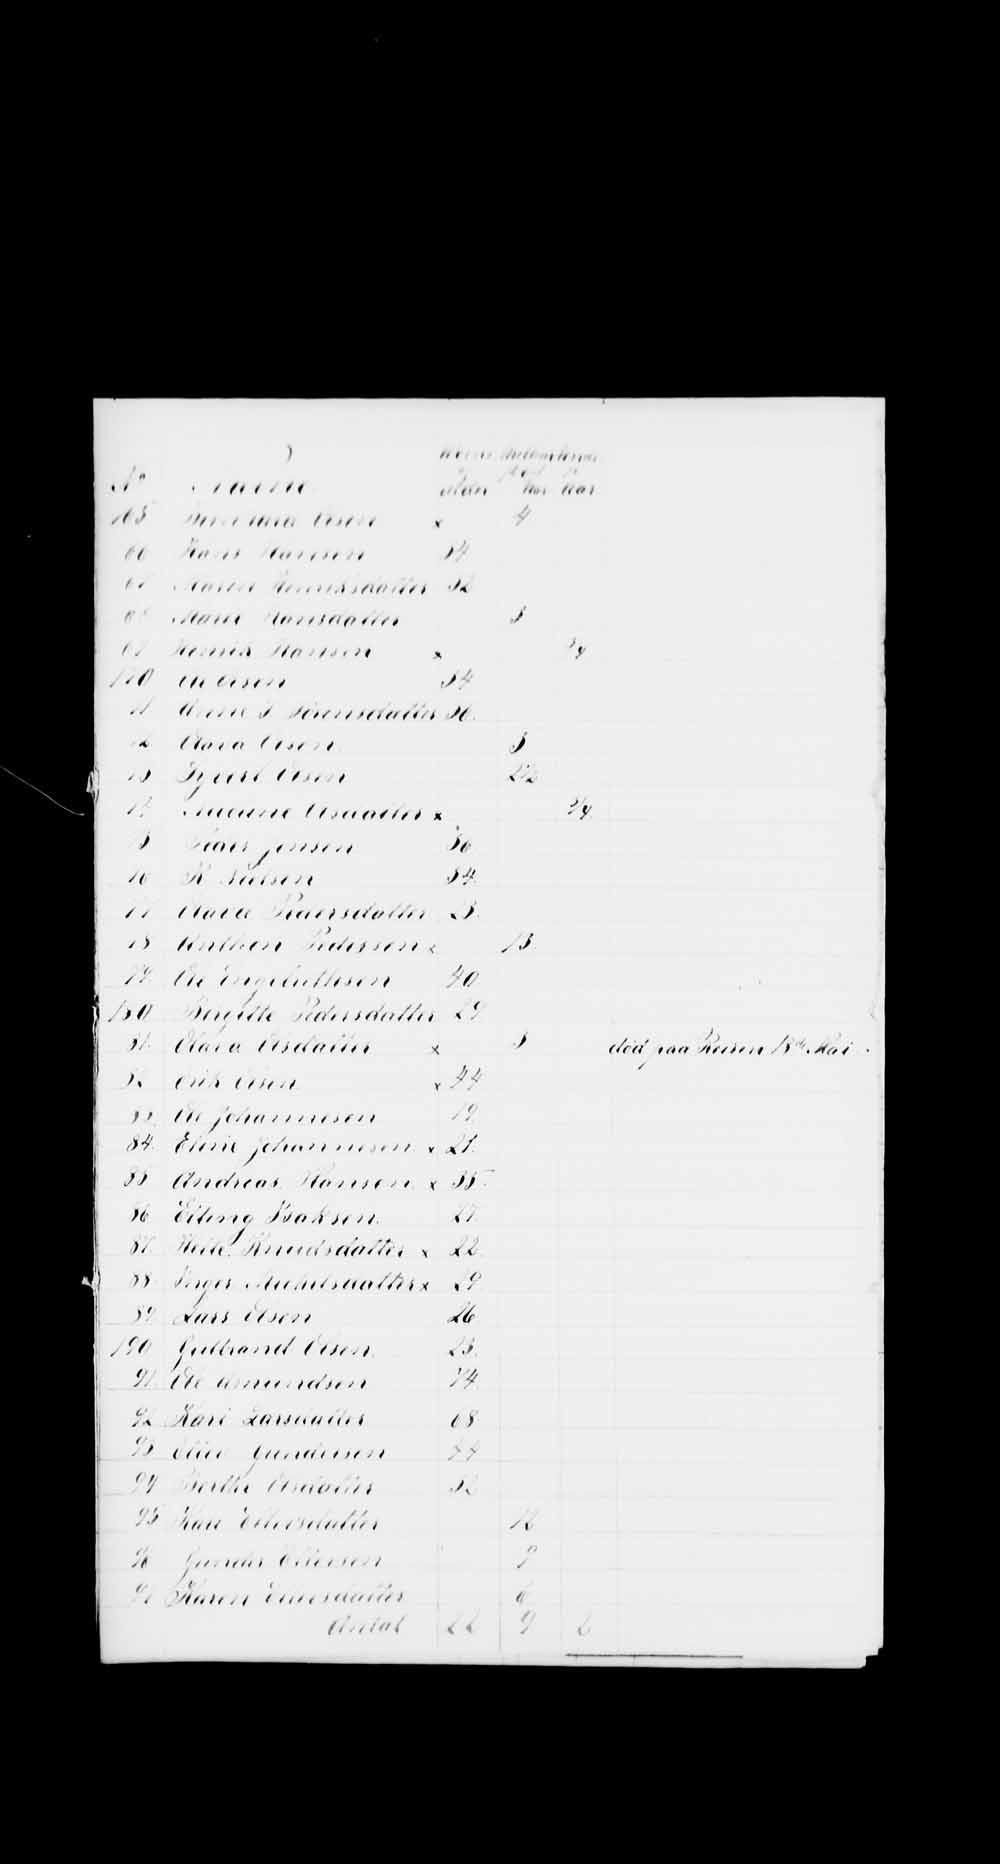 Digitized page of Passenger Lists for Image No.: e003530328